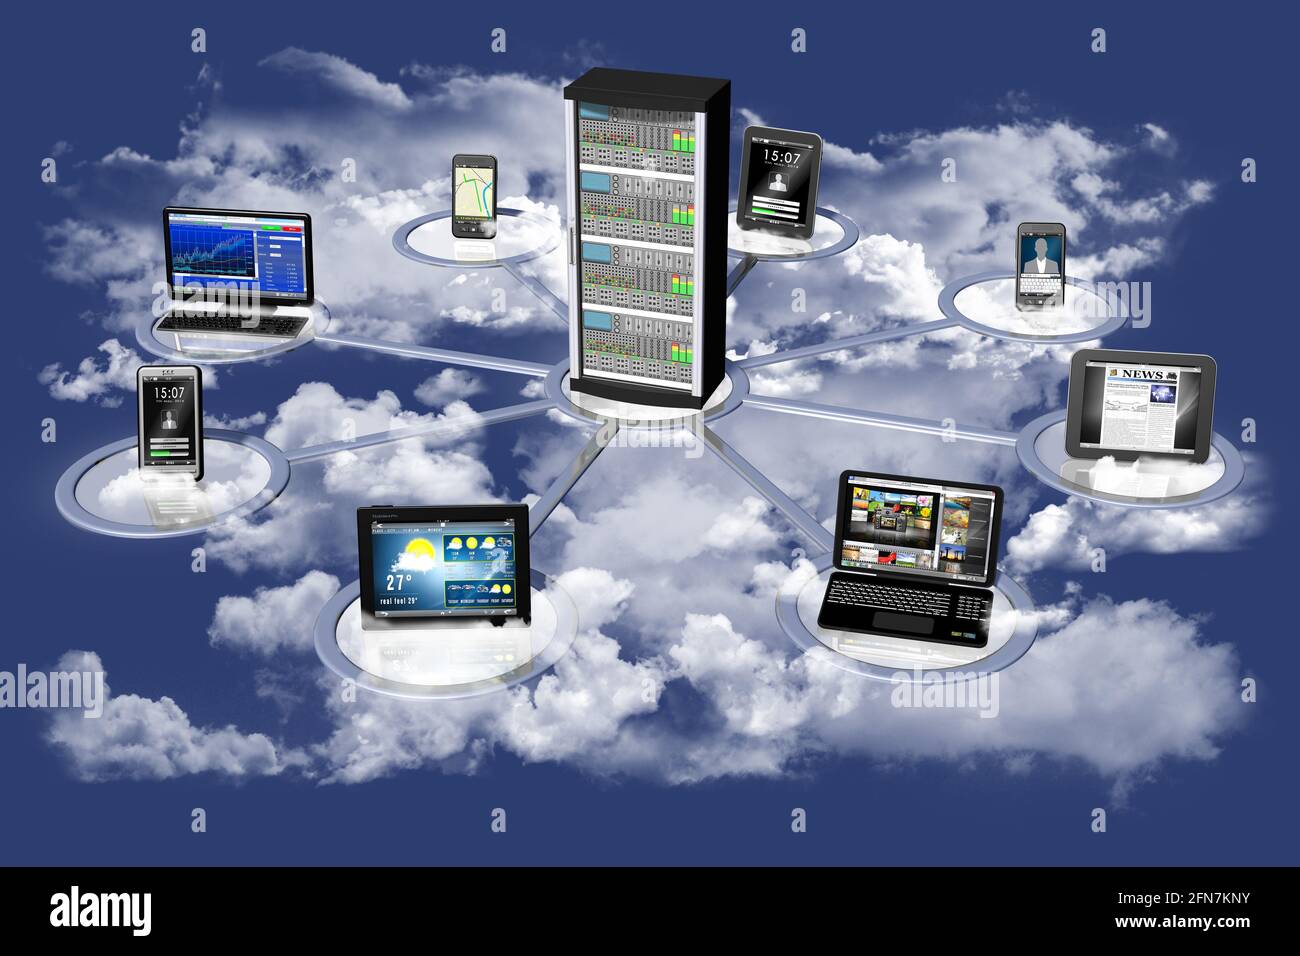 3D illustration. Representation of computer systems, Computer, computers, tablets, smartphones, connected to each other and to a central server. Stock Photo